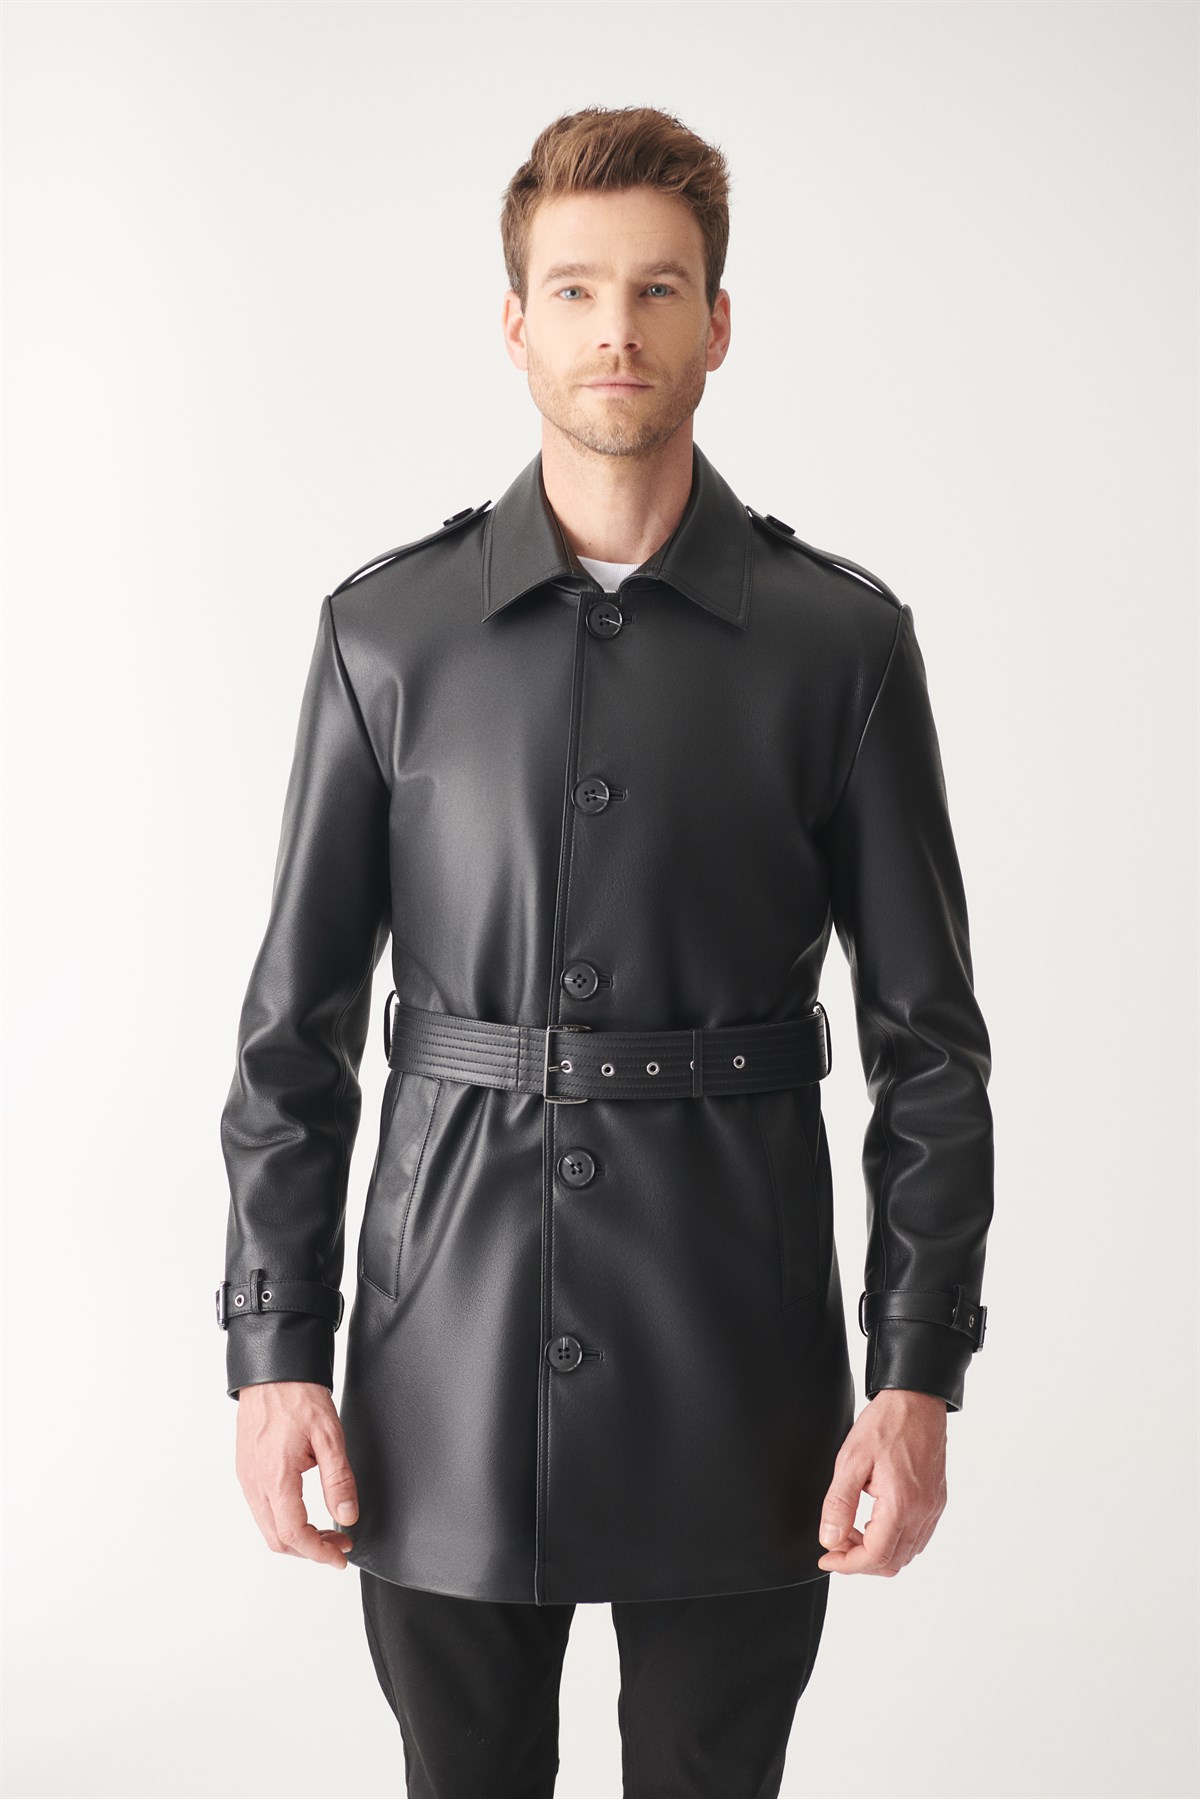 BRIAN Black Trench Leather Coat | Men's Leather Jacket Models